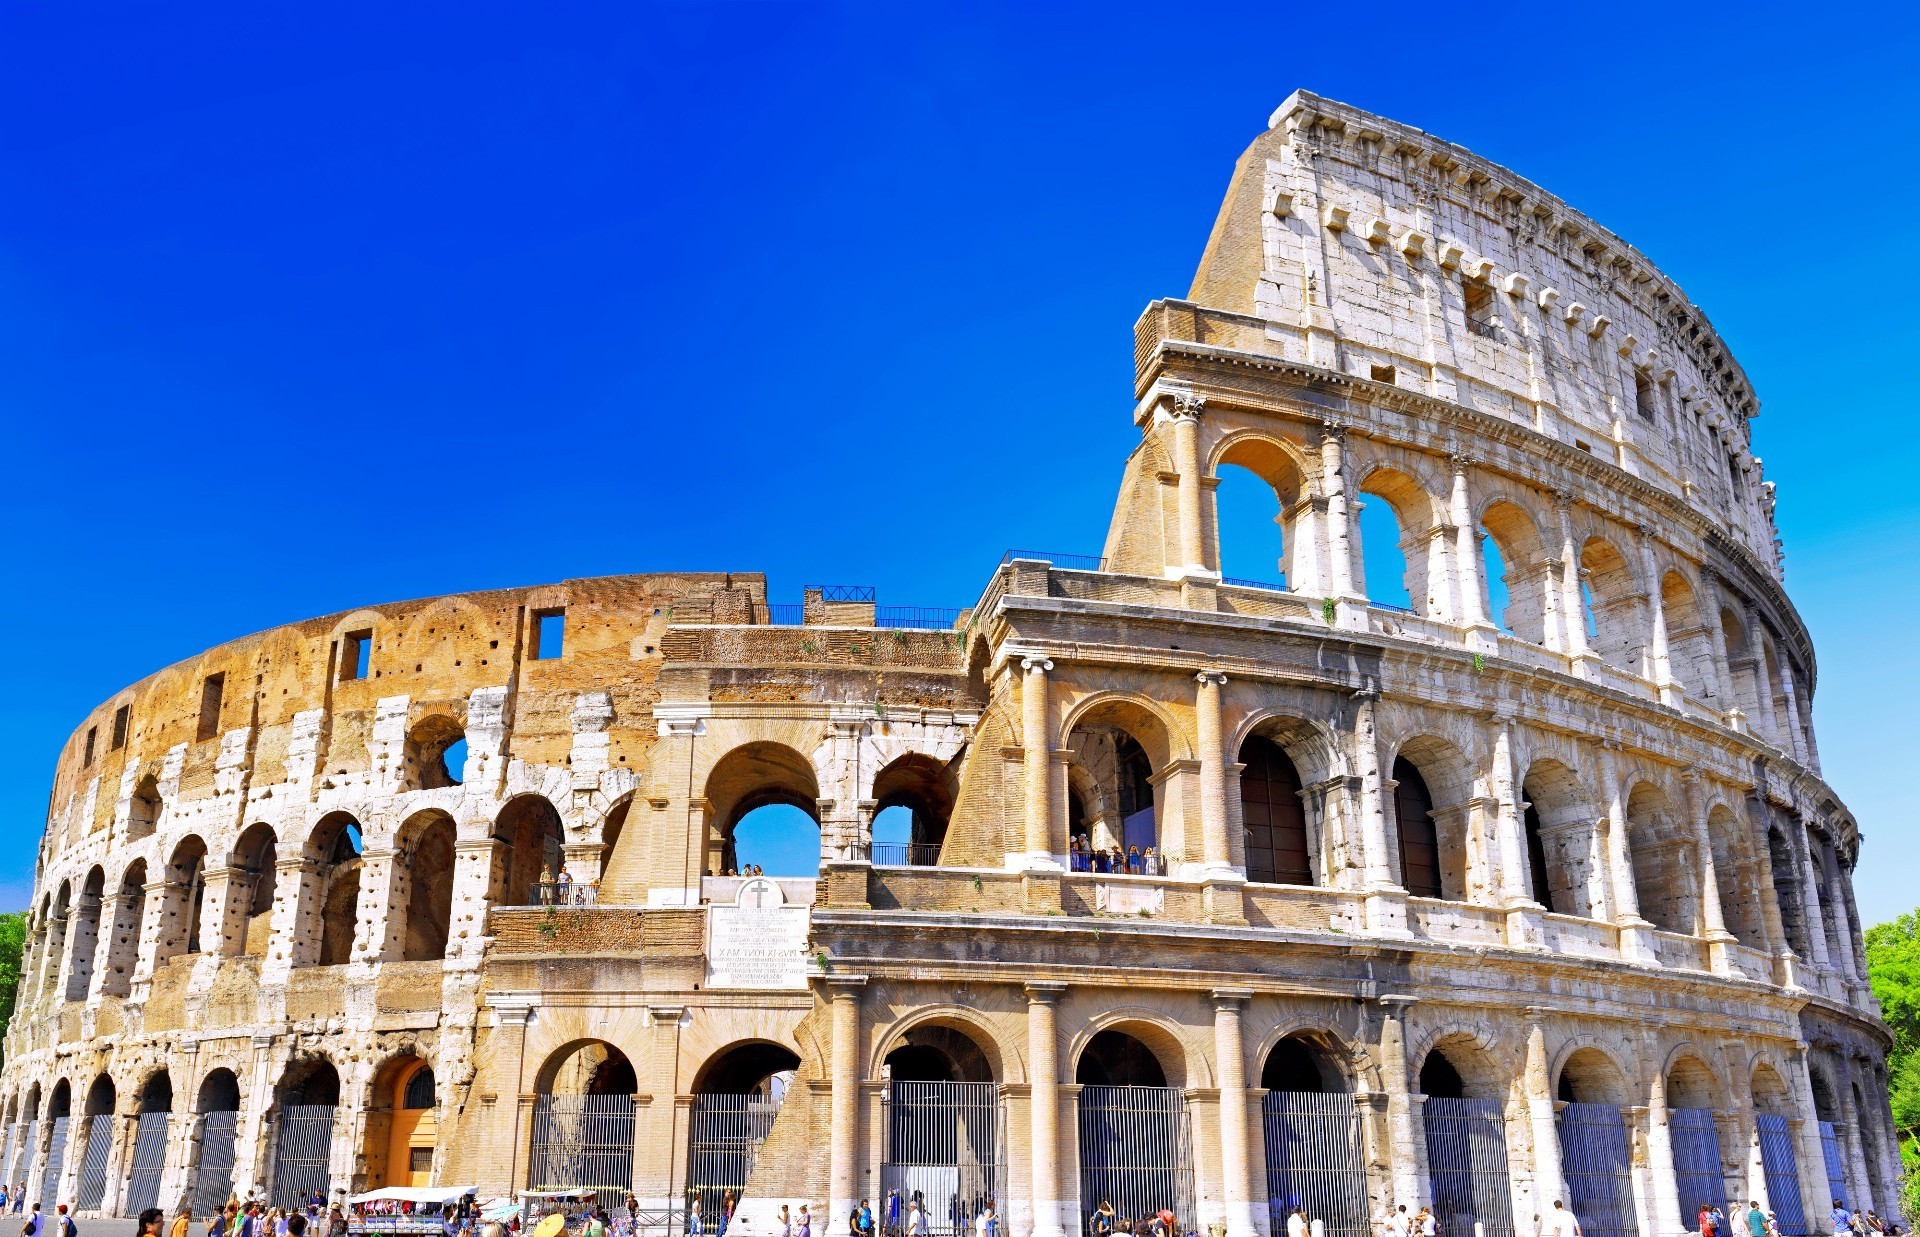 ancient architecture architecture colosseum amphitheater ancient stadium travel old building landmark sky monument famous tourism gladiator historic ruin outdoors arch stone